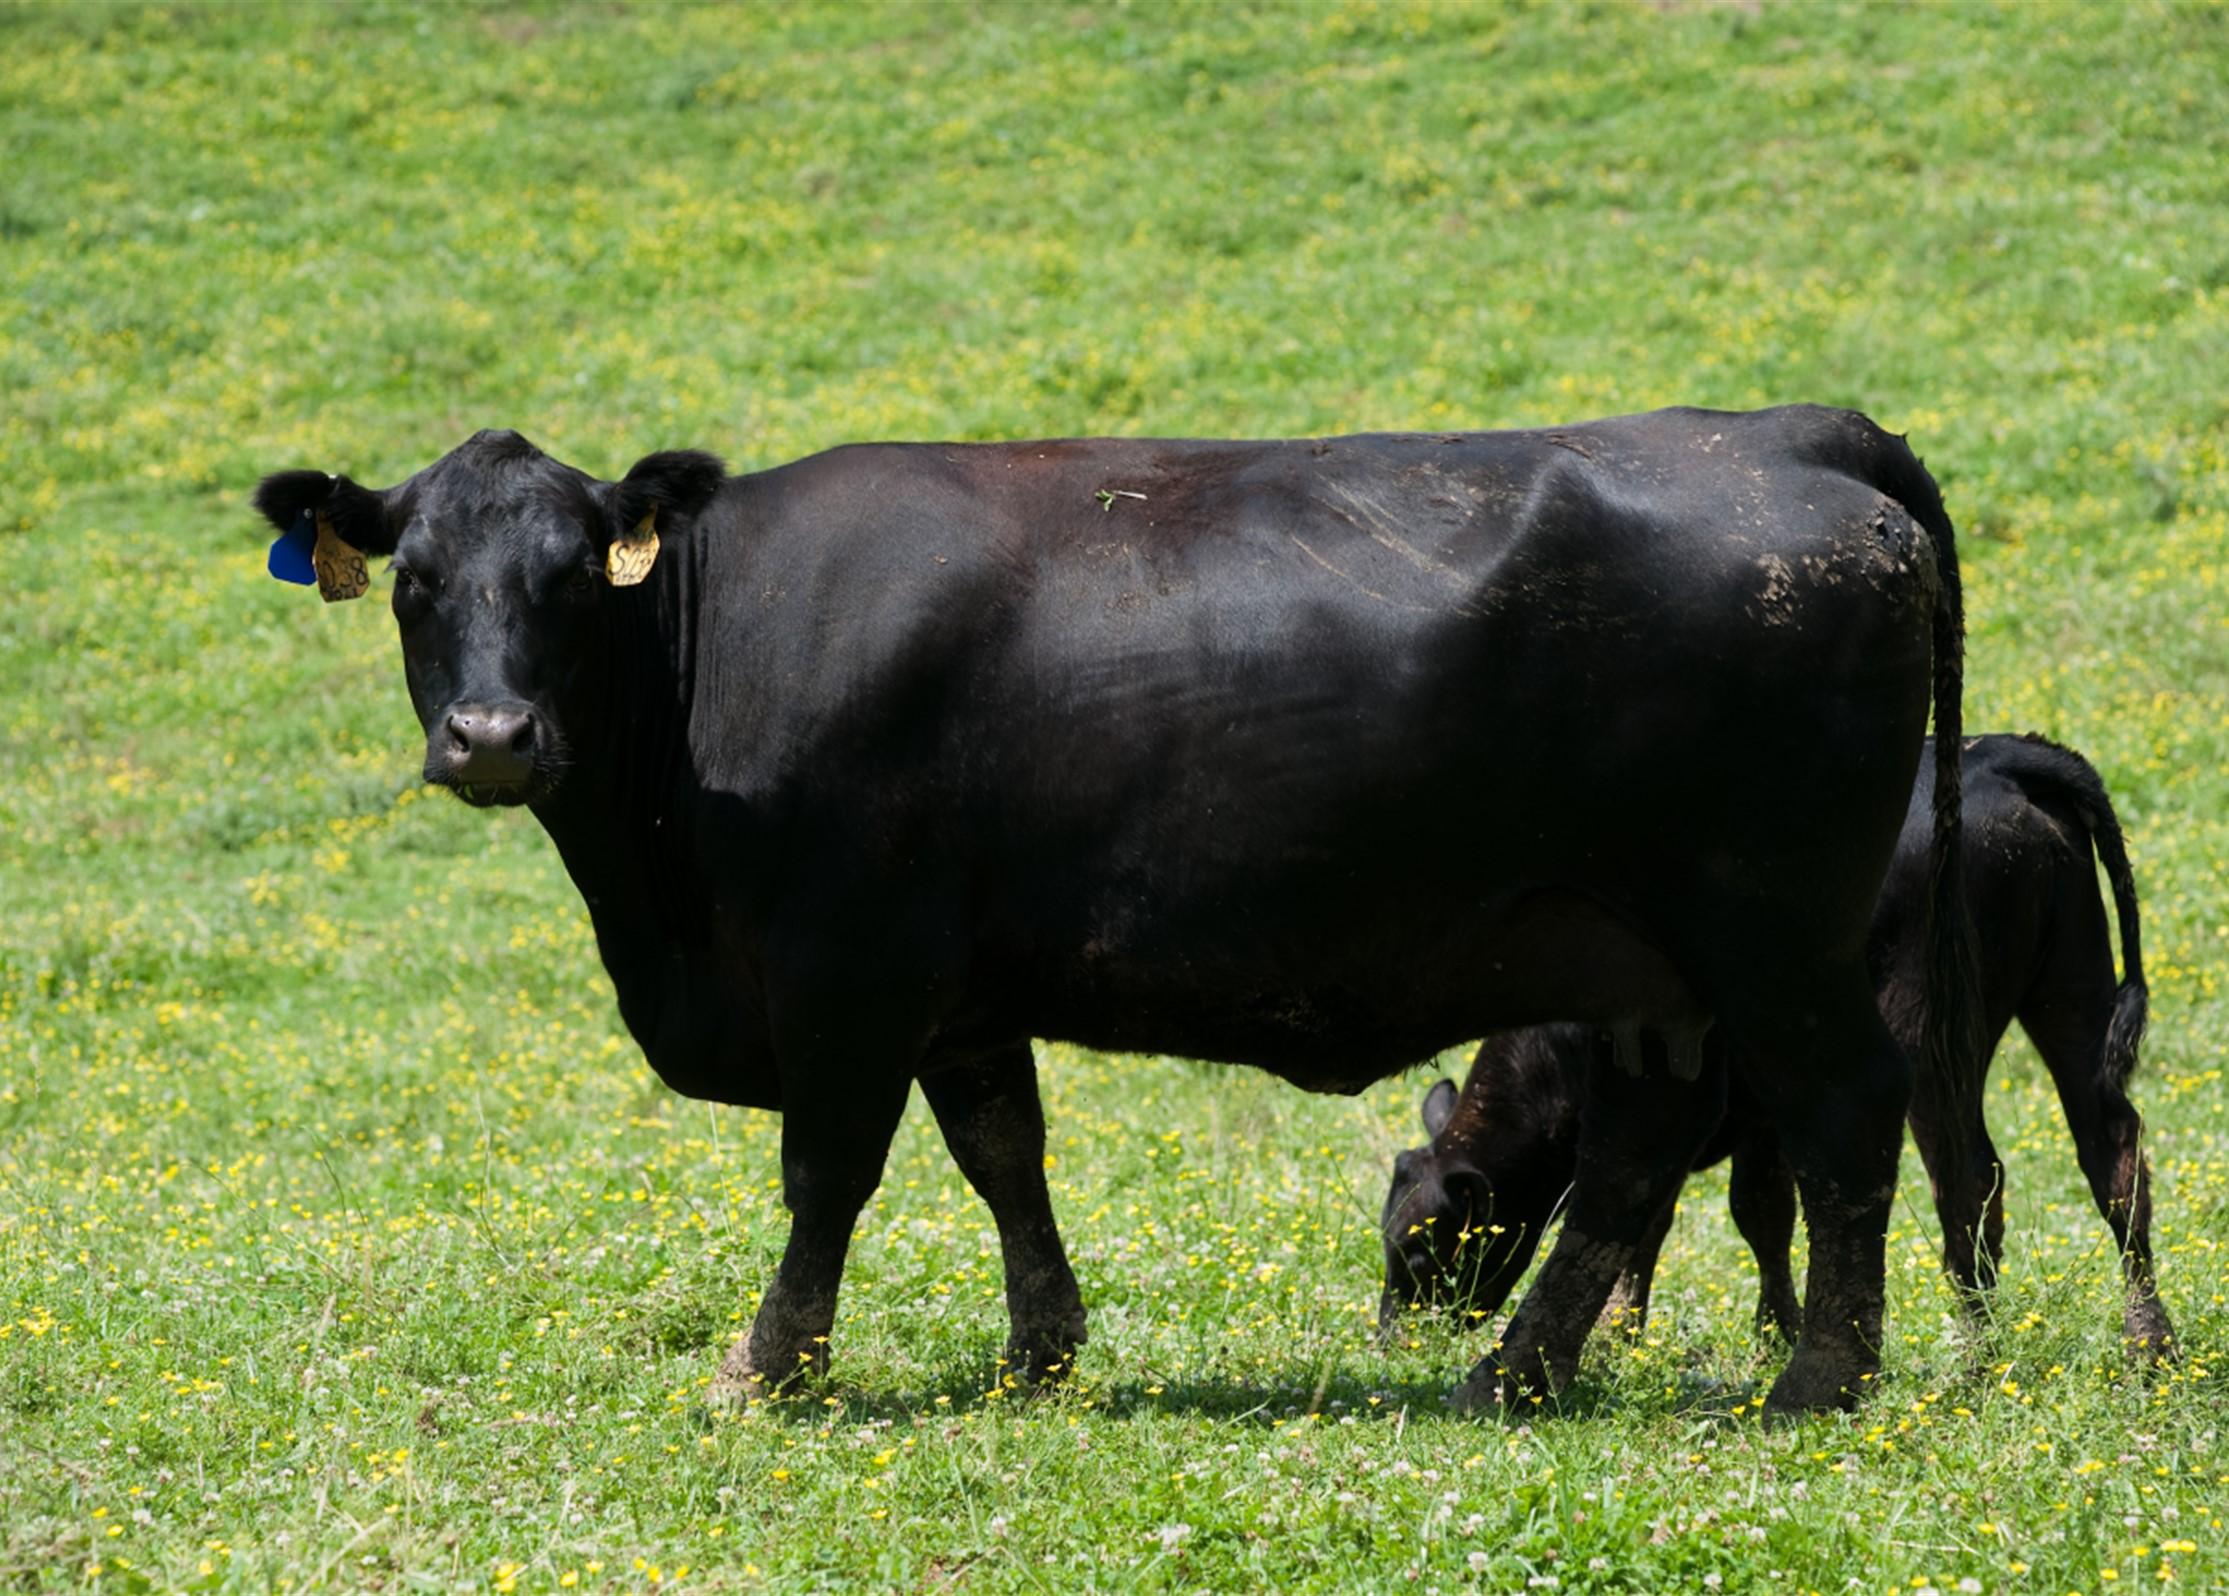 Black angus and calf in green pasture. Photo: Edwin Remsberg